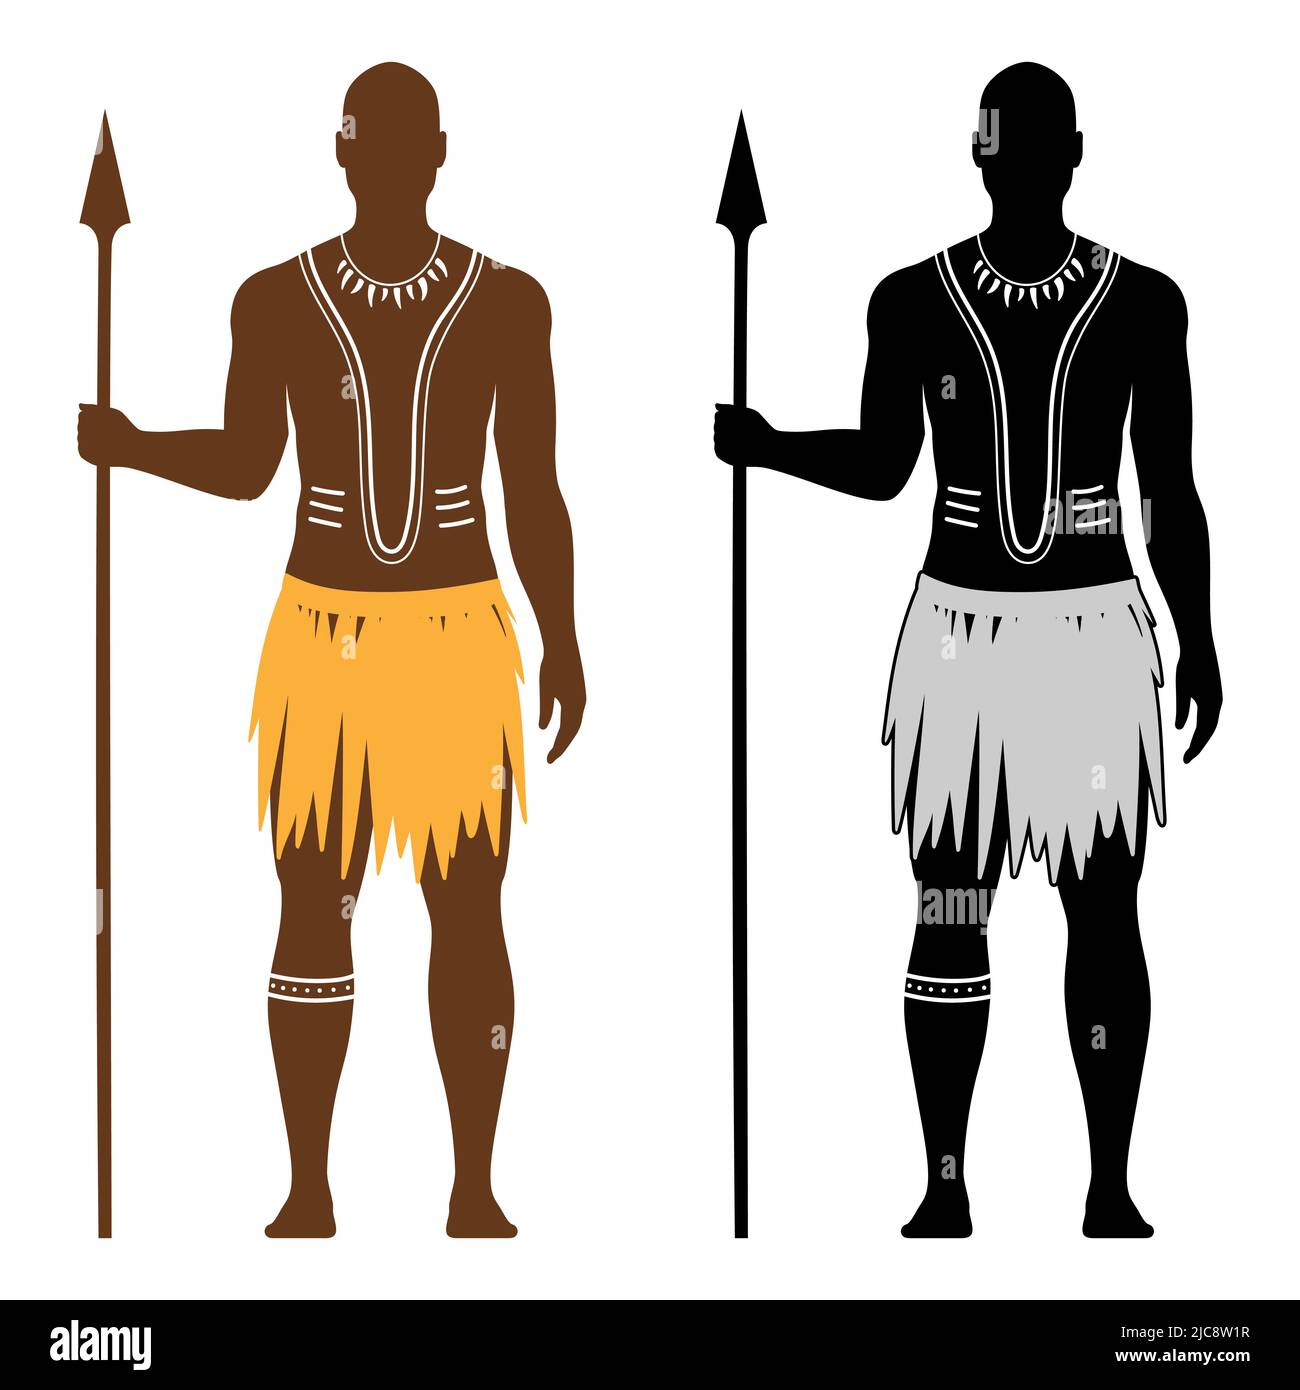 Vector set of African black aborigine warrior man with traditional body art, holding a spear, and dressed in an ethnic dress, isolated on white background. Stock Vector